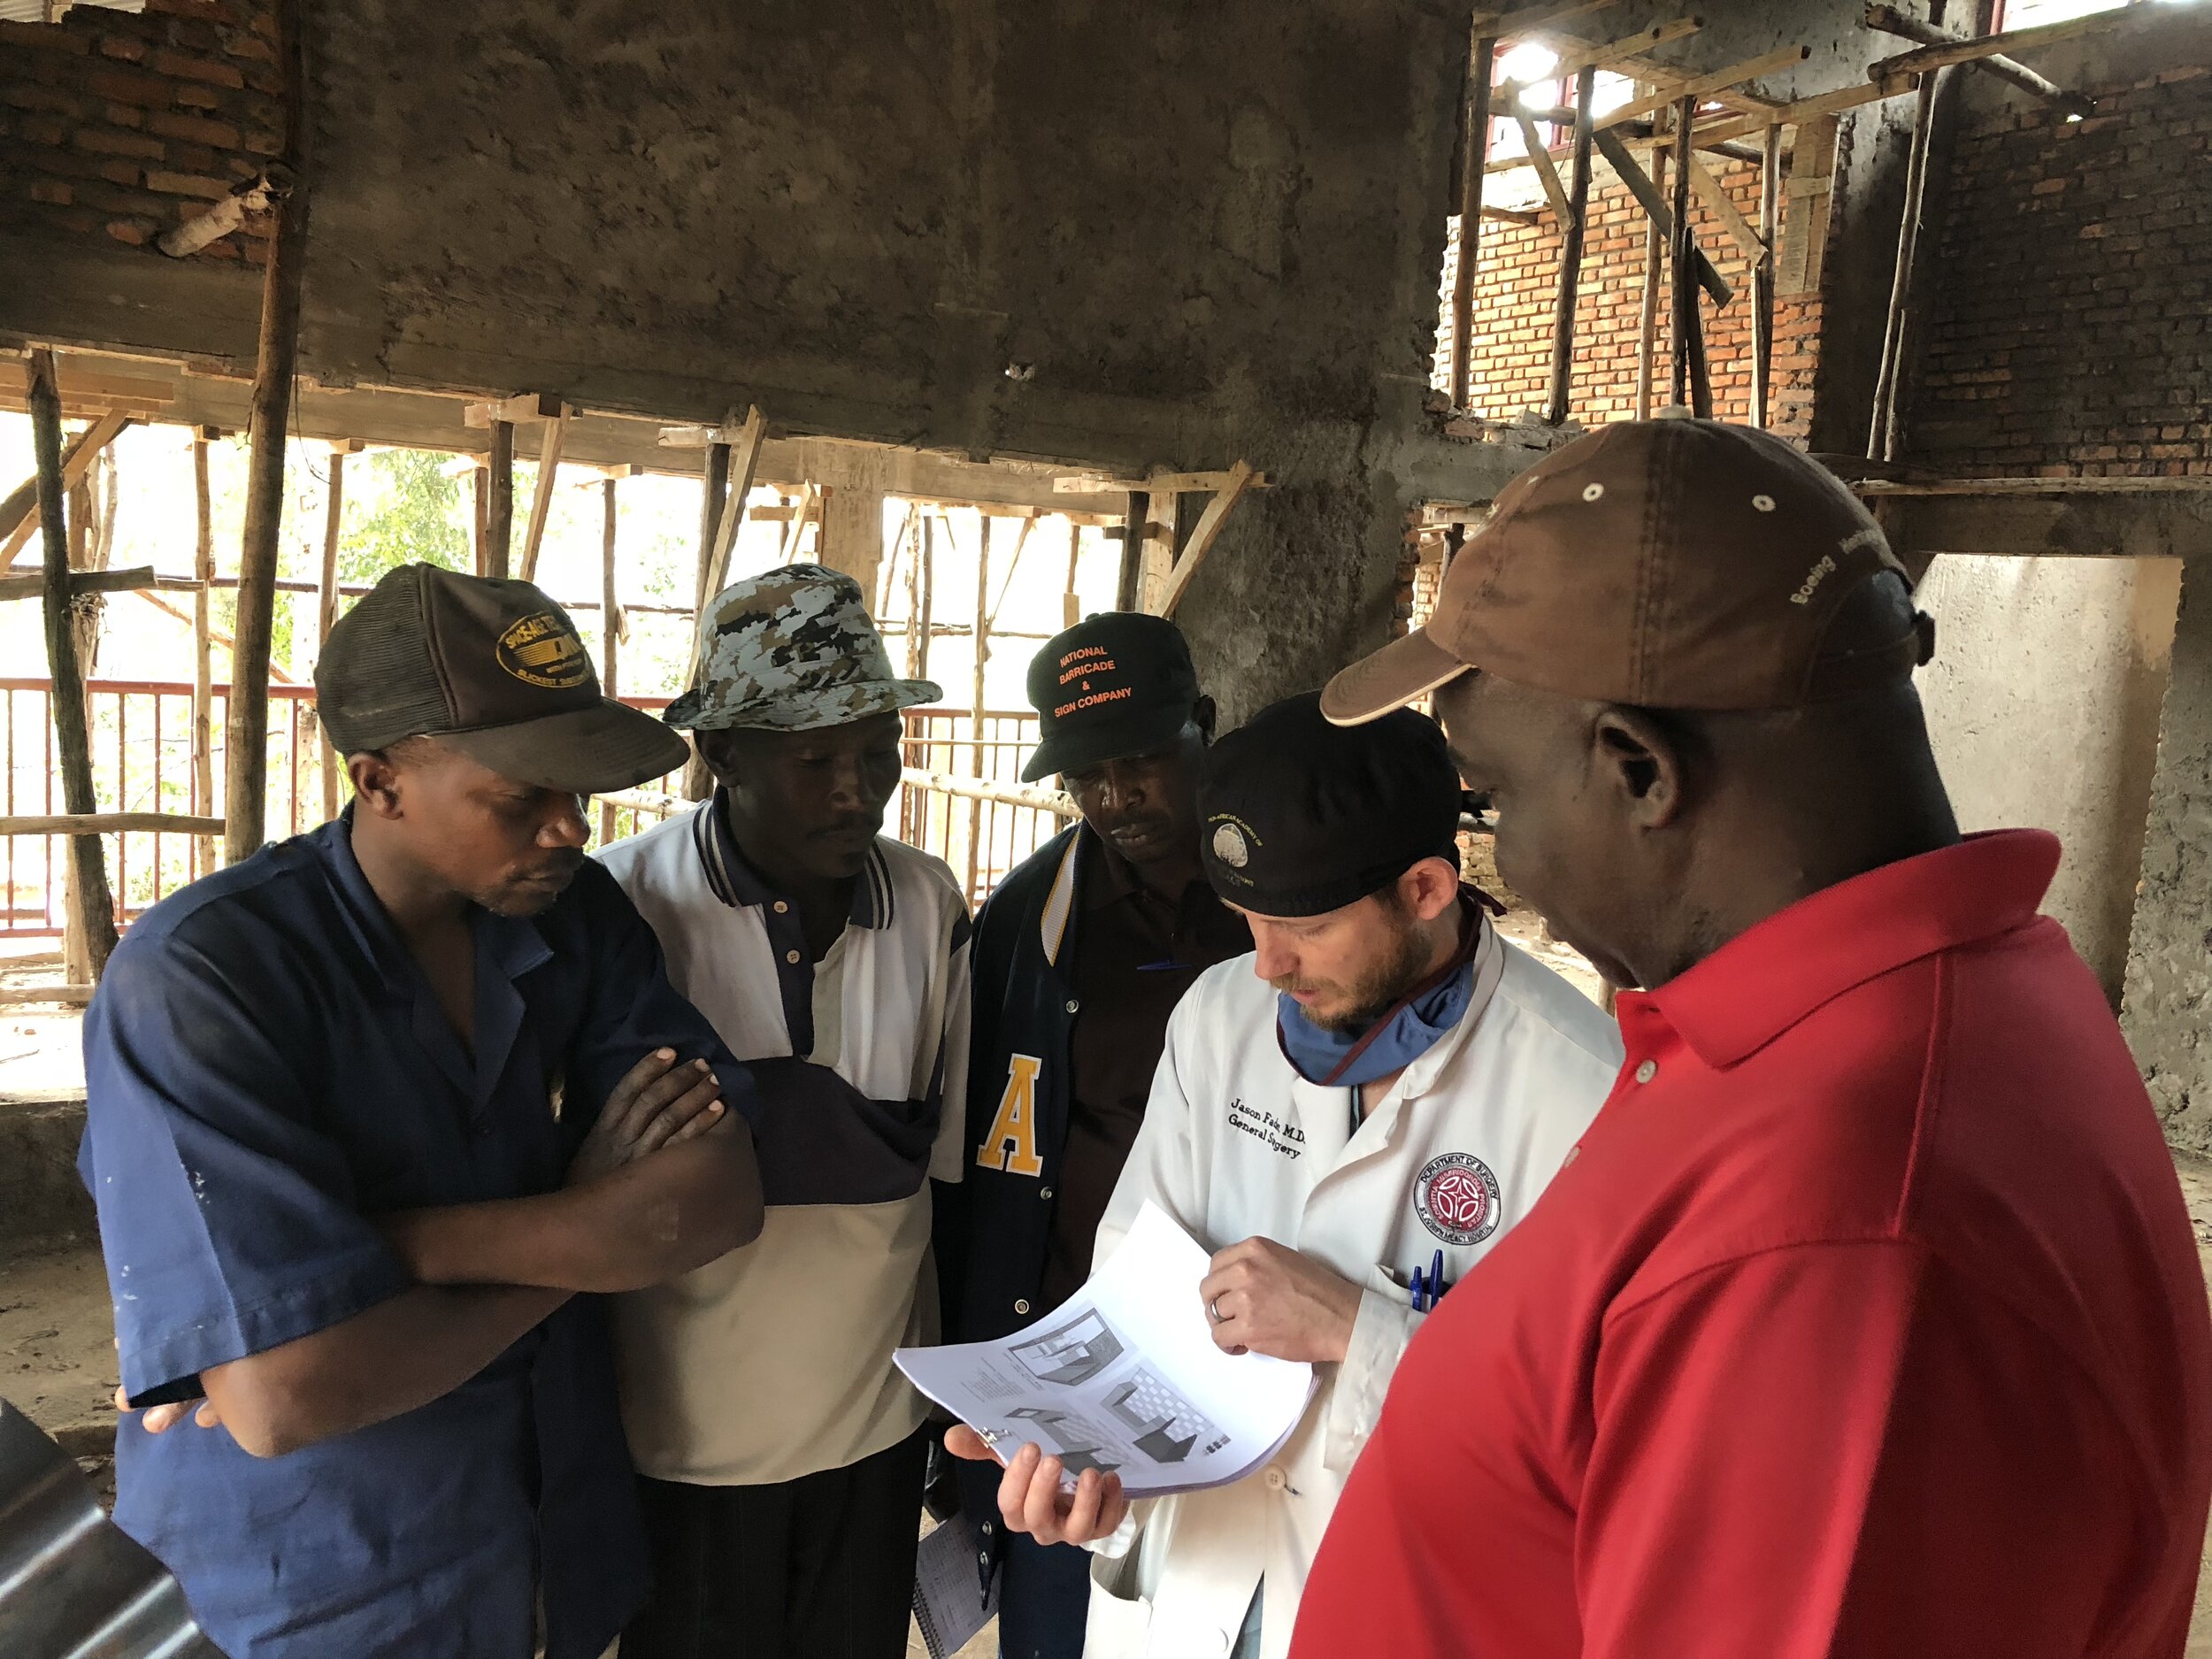  Discussing plans with a local construction team. Kibuye has continuously employed approximately 250 full time local masons, carpenters, welders, and other tradesmen. 